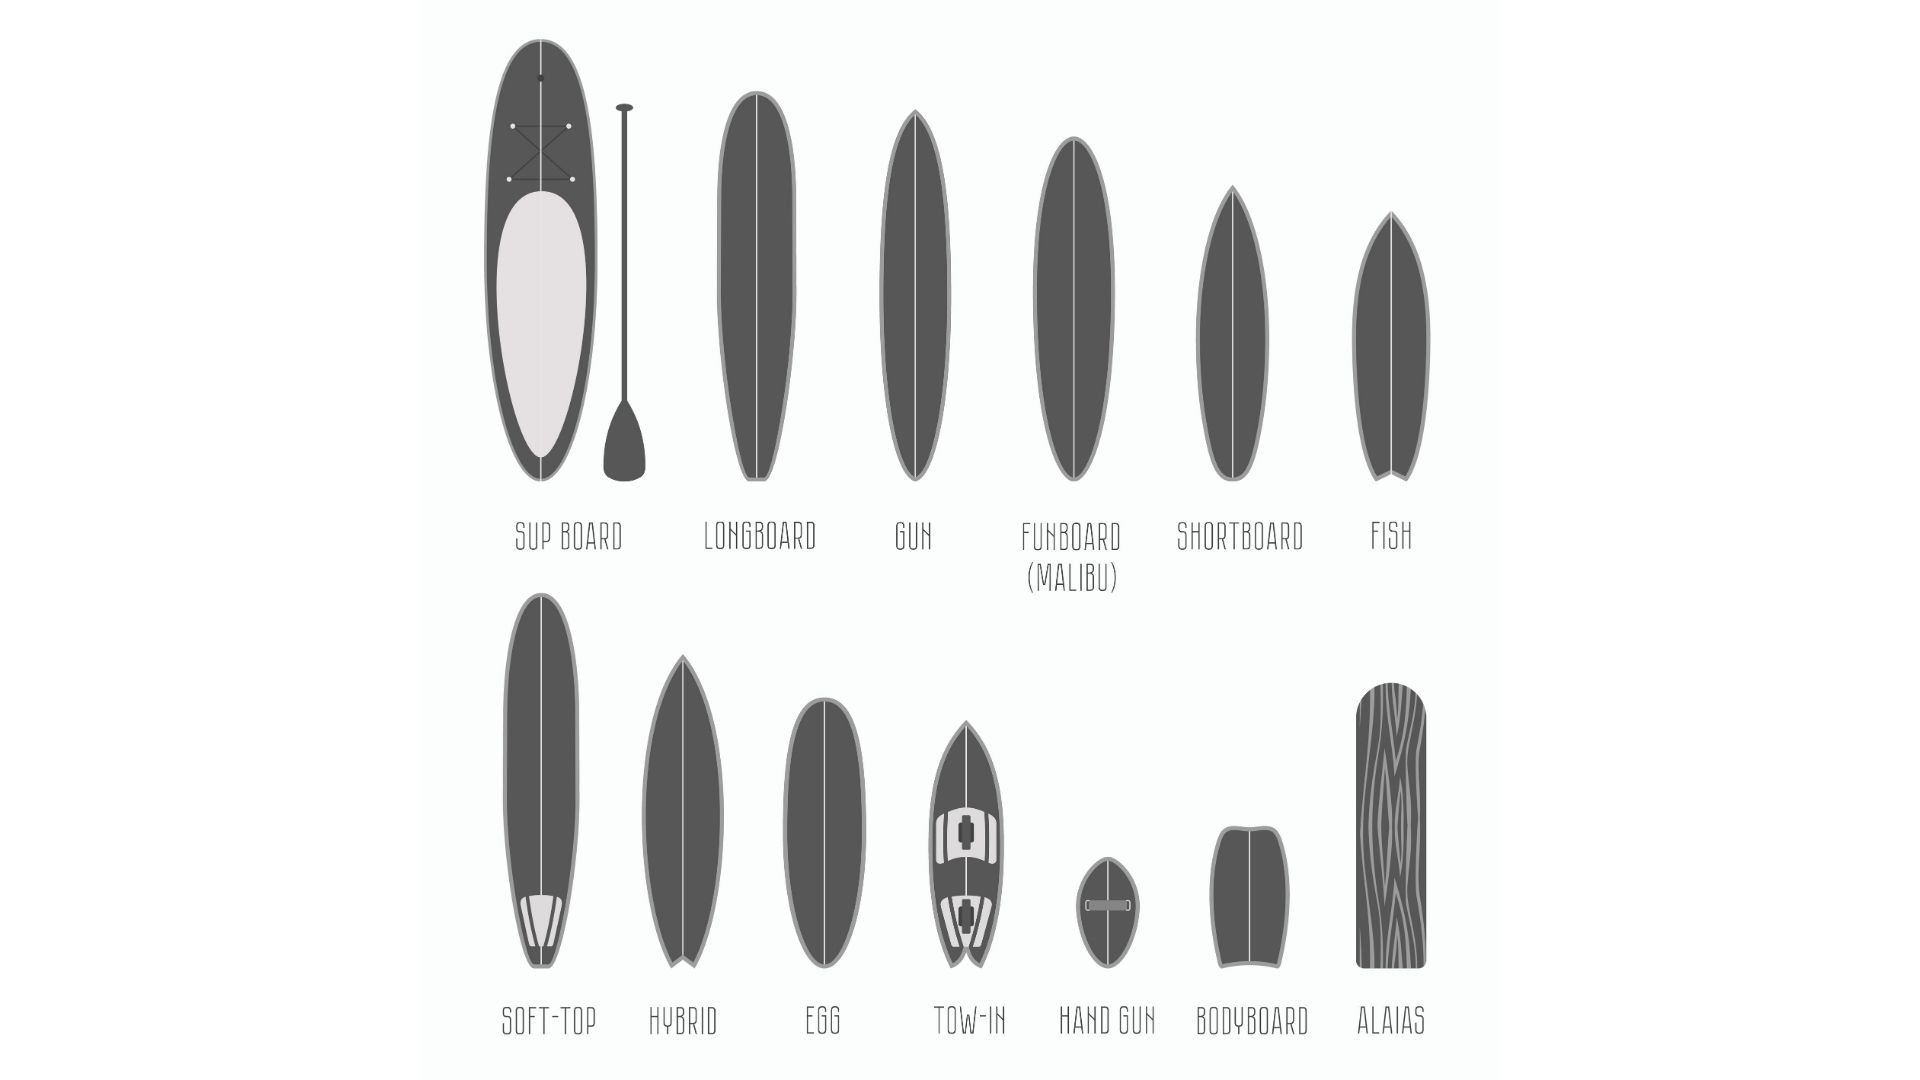 In-between beginner and intermediate? Surfboard sizes and info